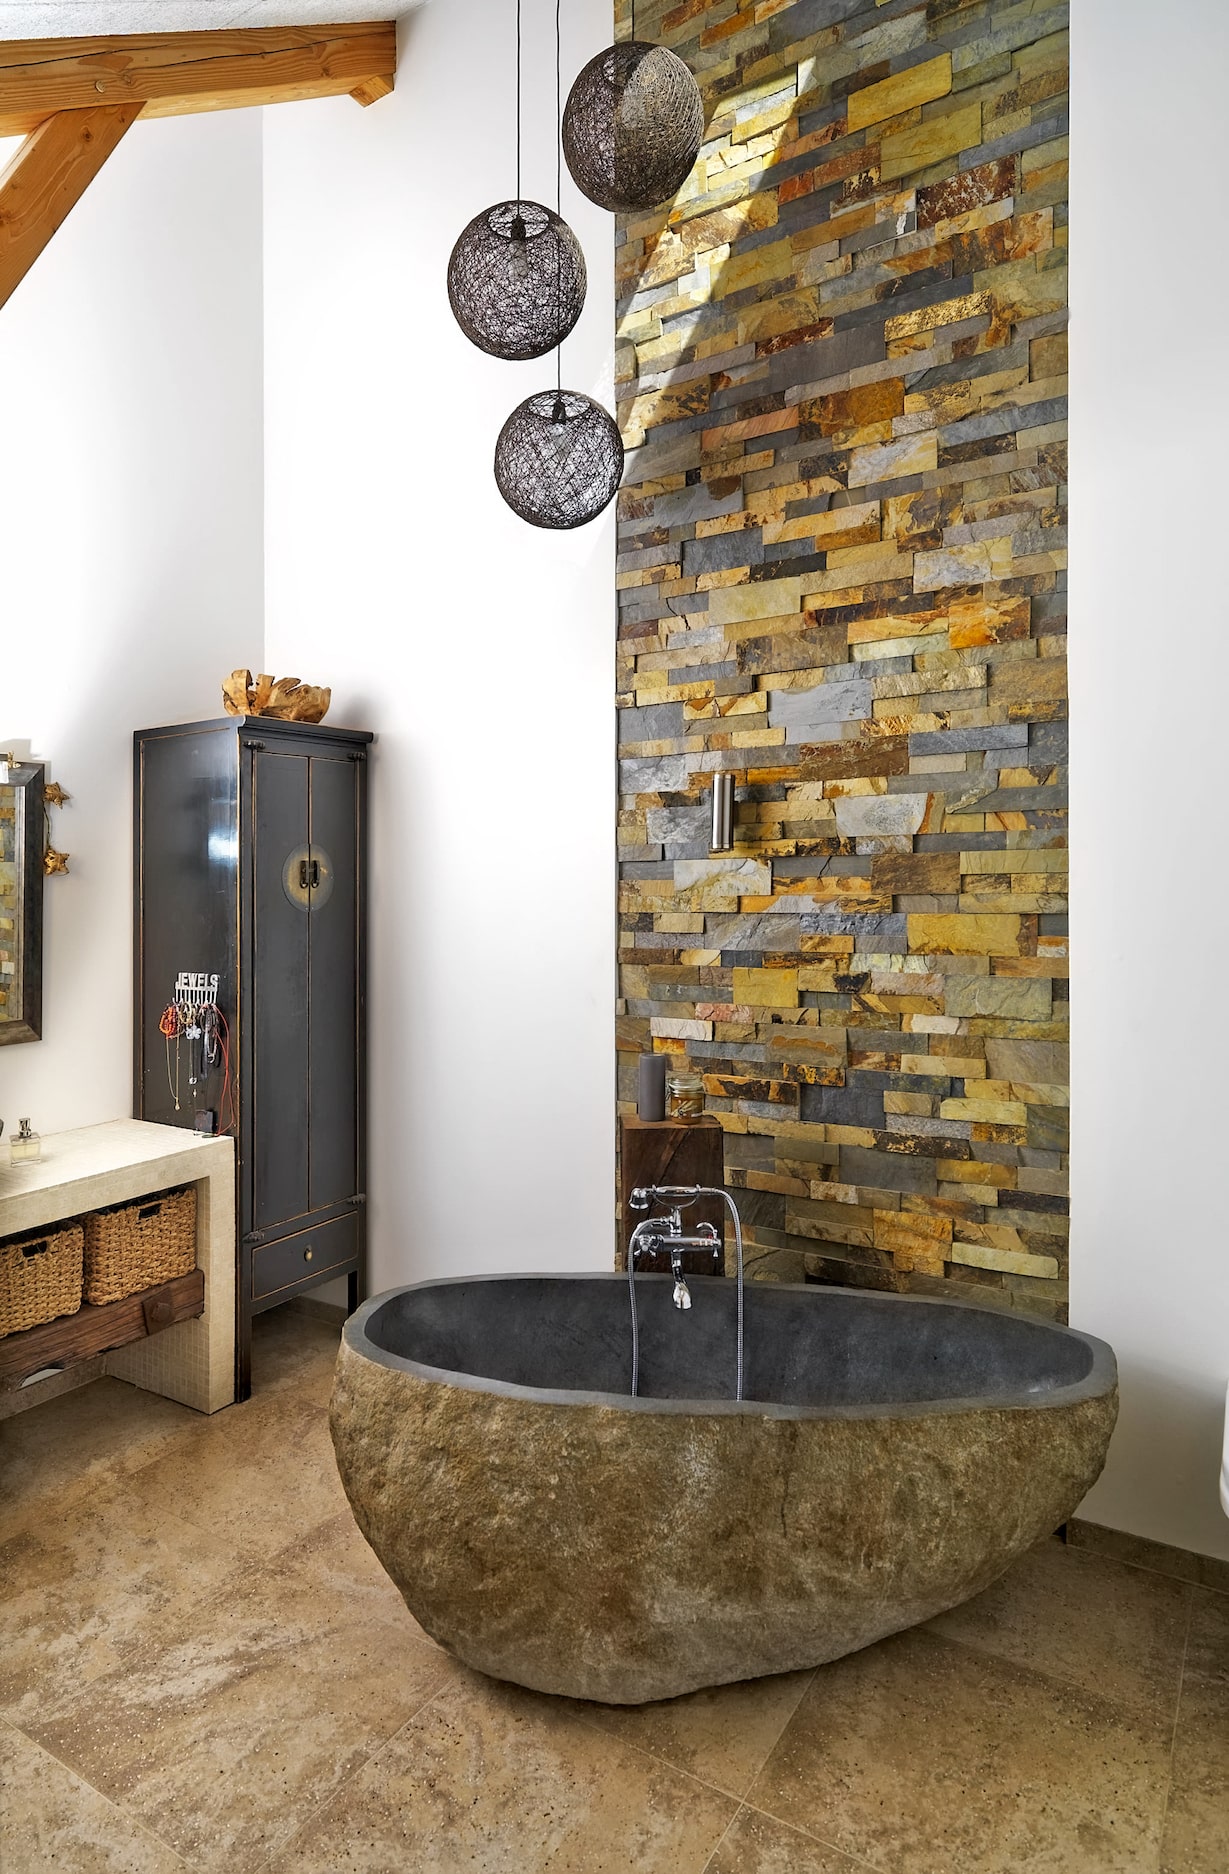 Norstone Ochre XL Feature Wall in a bathroom feauturing a freestanding one piece natural stone tub